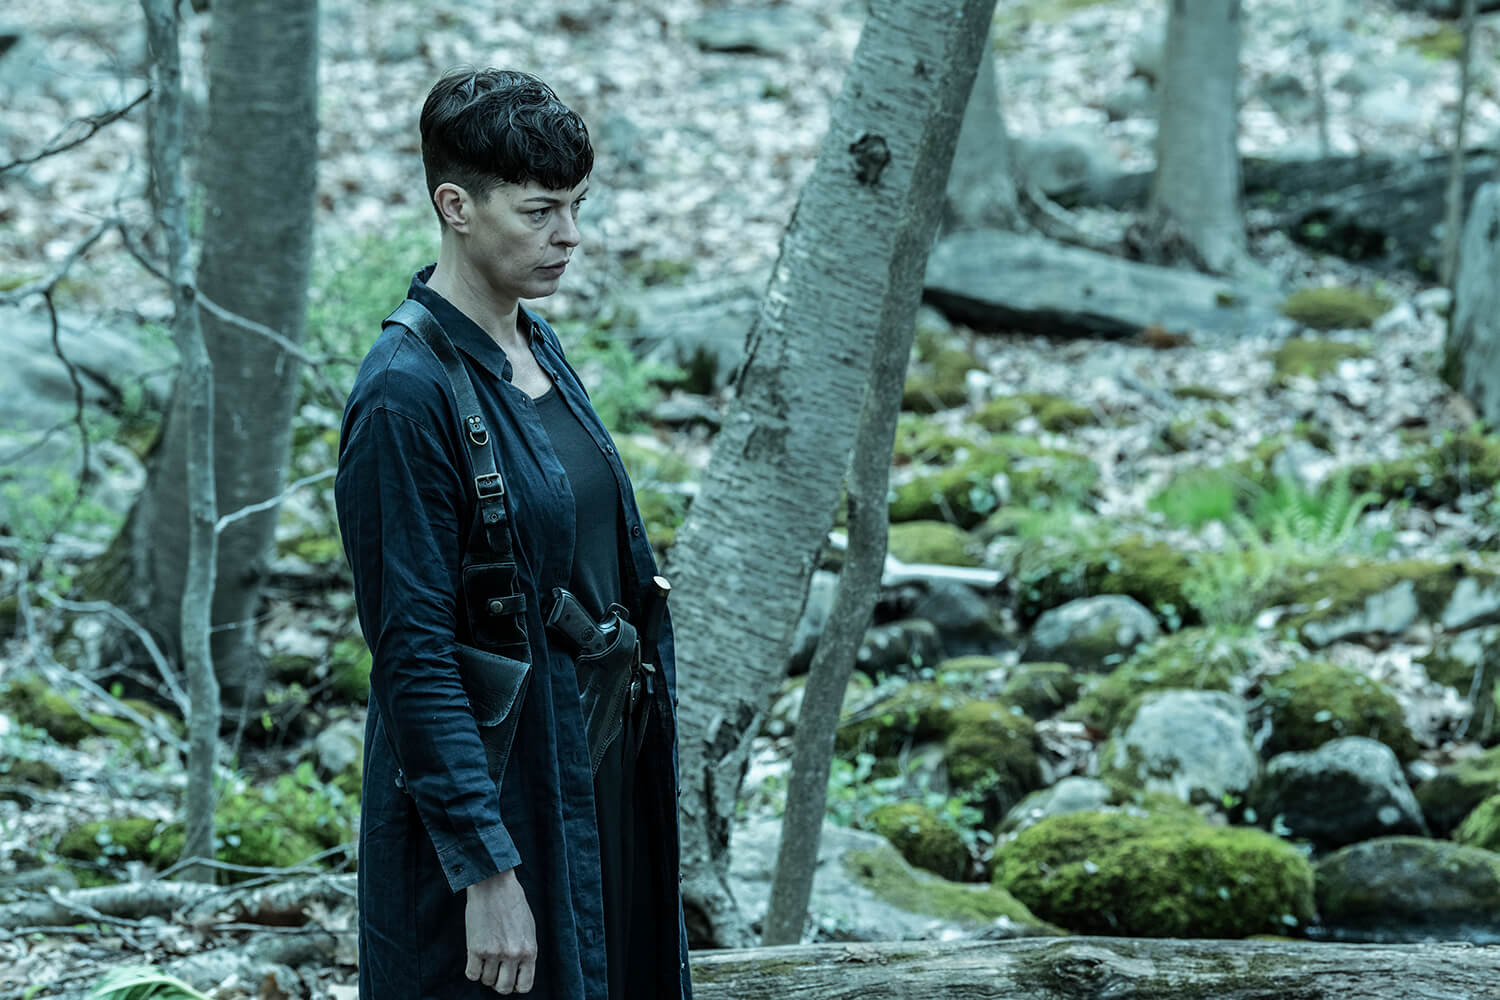 Jadis standing in the forest in a scene from The Walking Dead: The Ones Who Live.